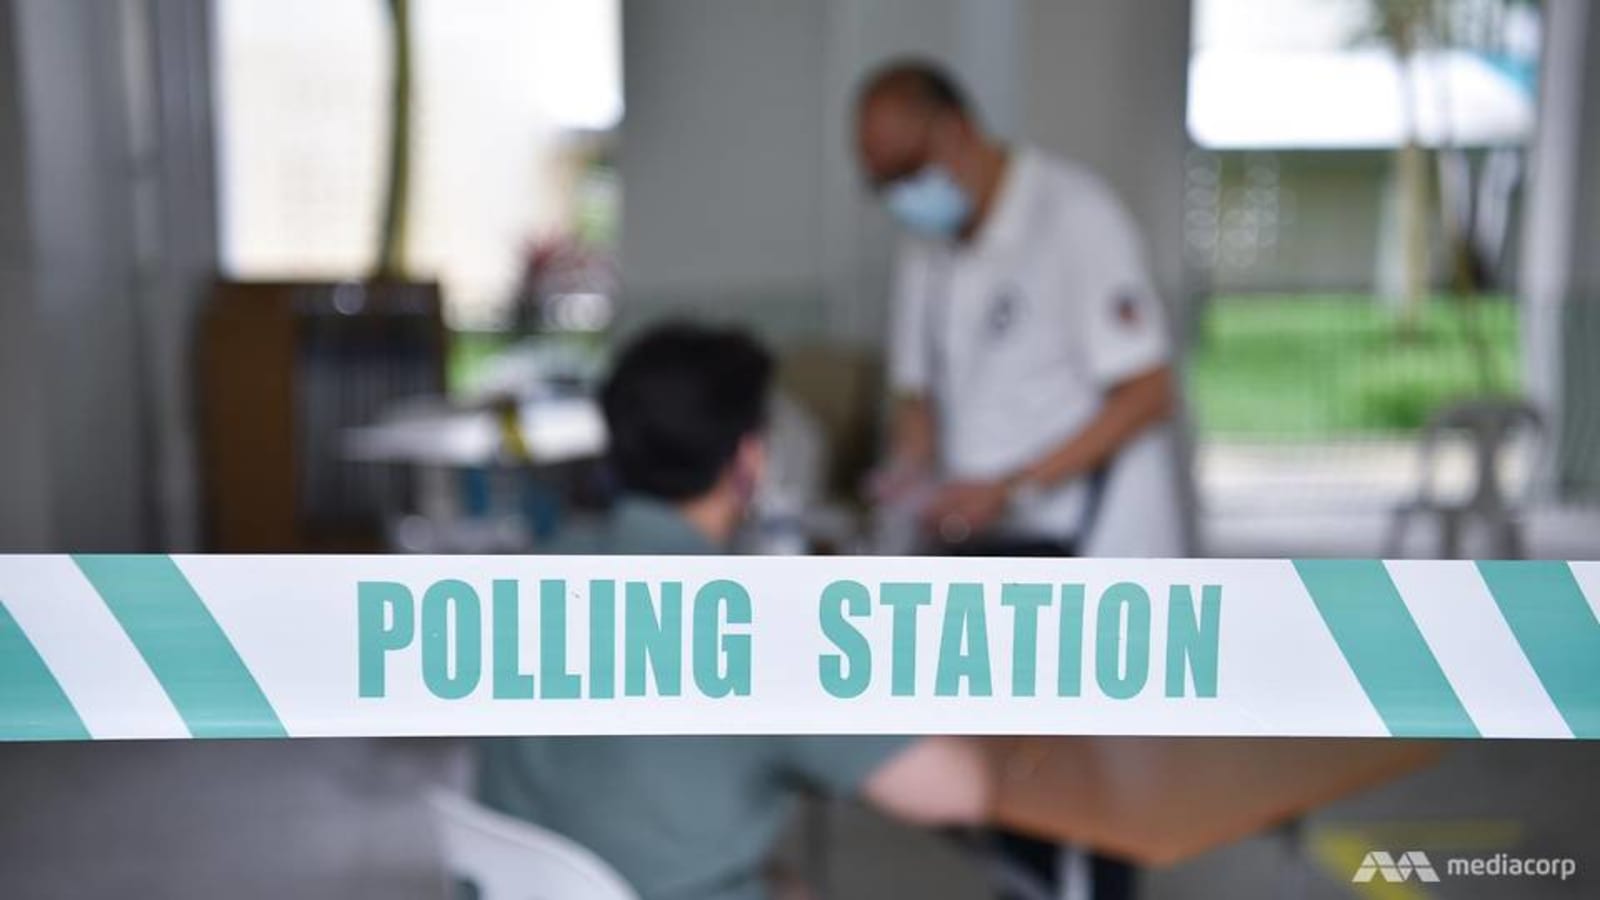 Elections Department seeking feedback about new voting arrangements for overseas Singaporeans, voters in nursing homes